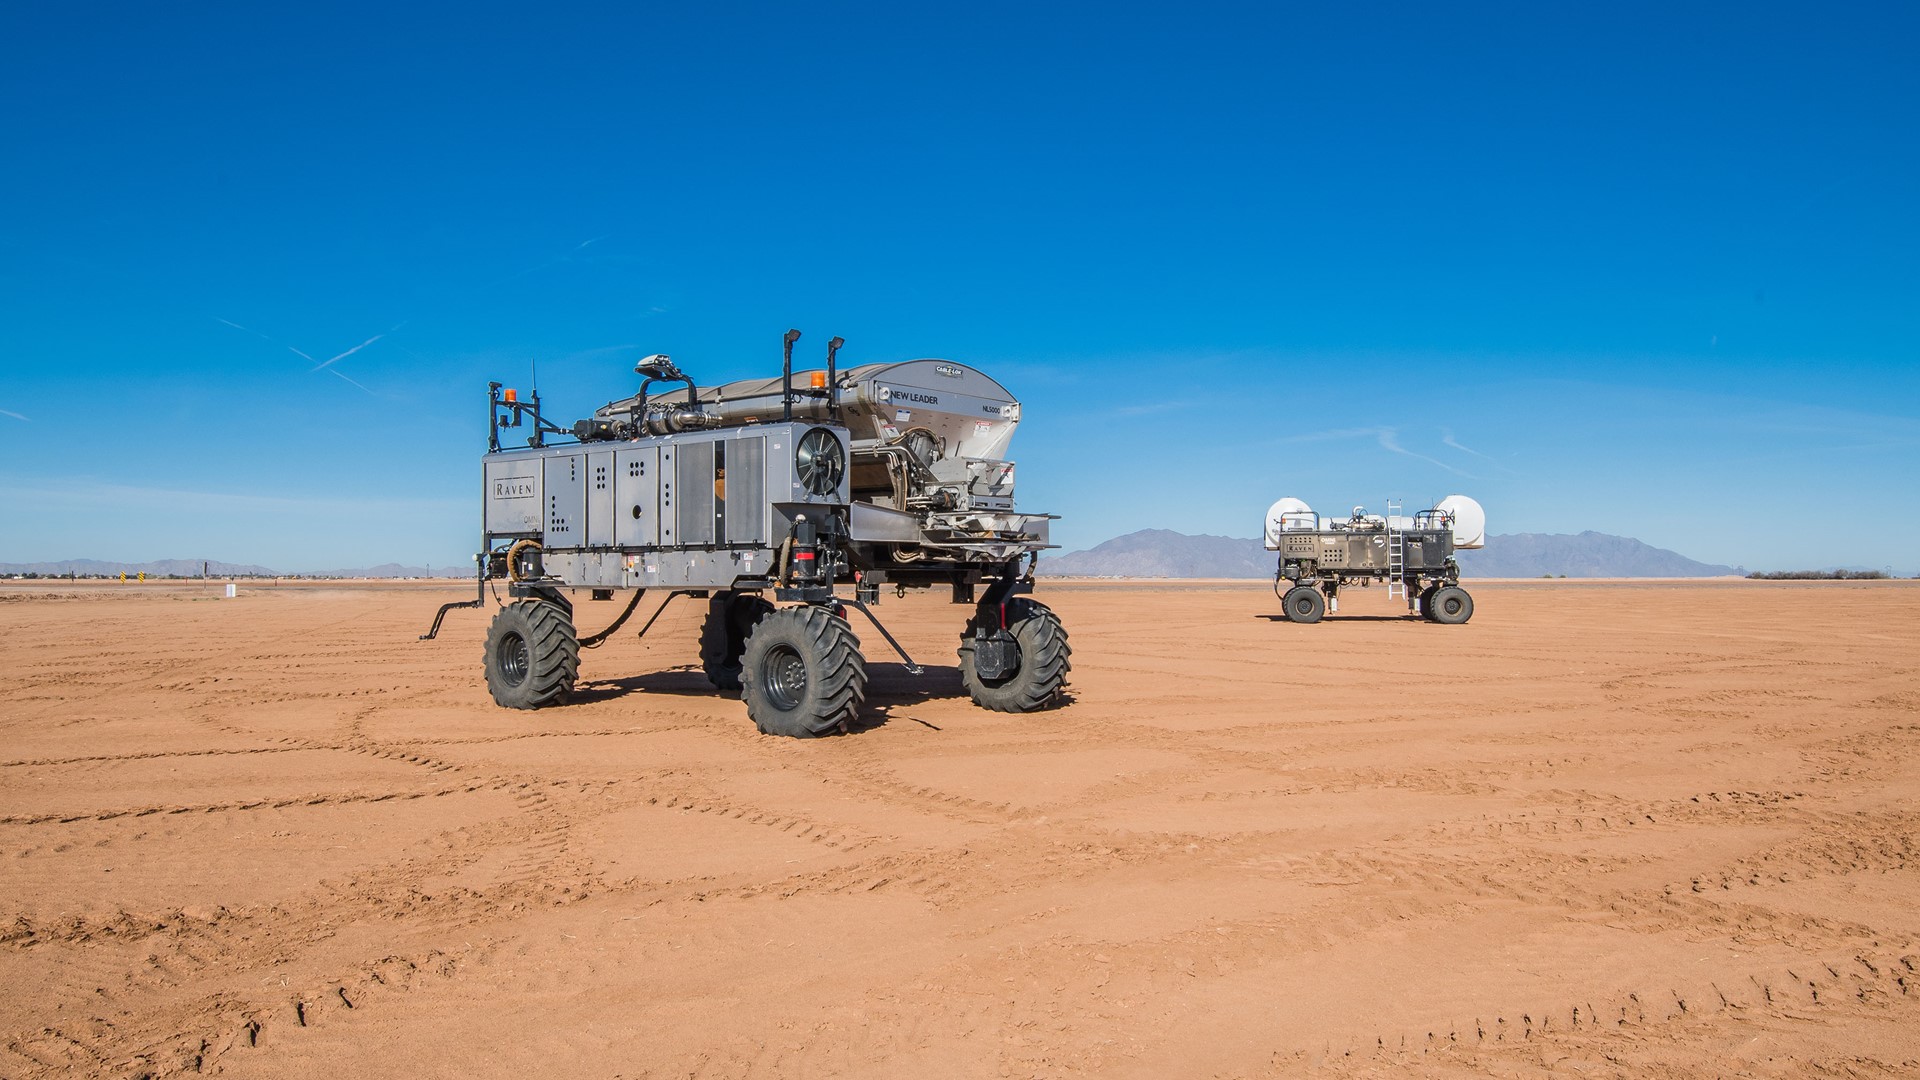 Testing and development for OMNiPOWER, Raven’s autonomous power platform, being performed in Maricopa, Arizona, USA